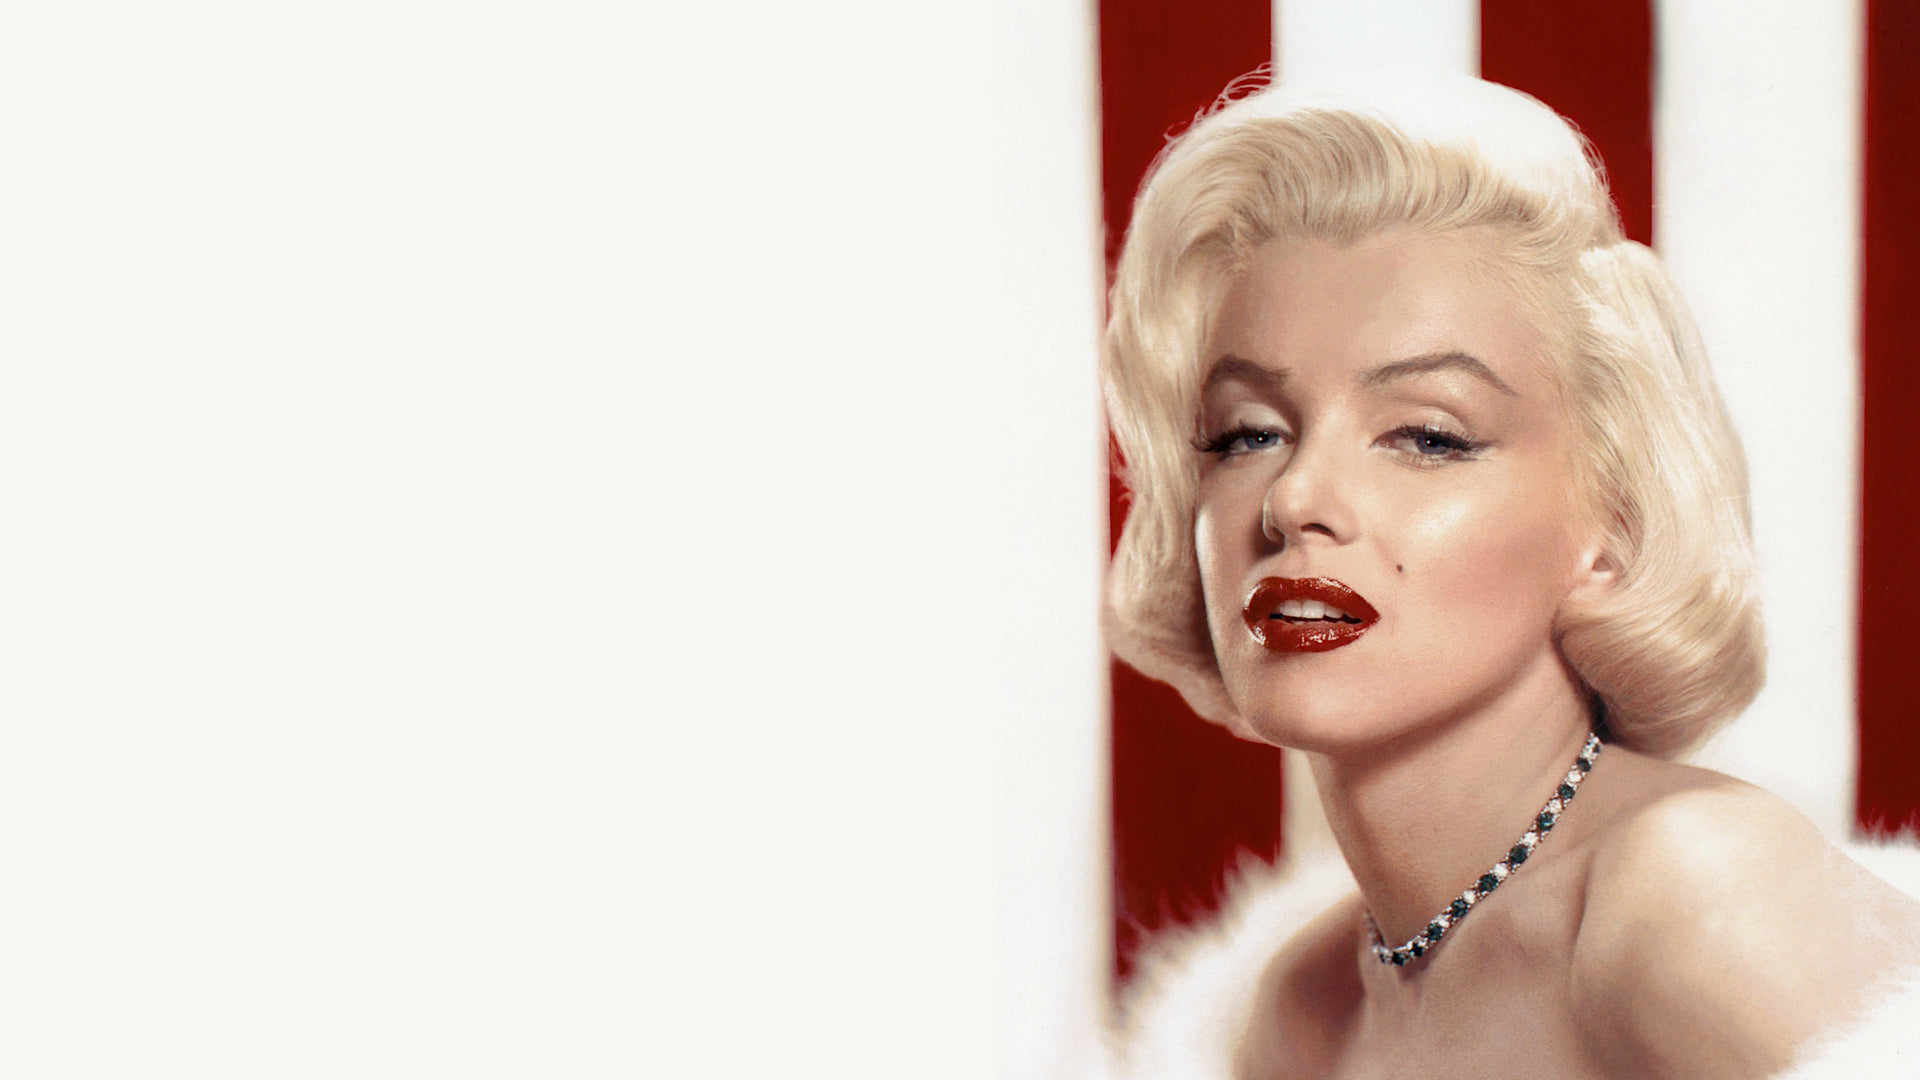 People 1920x1080 Marilyn Monroe women actress blonde necklace closeup red lipstick bare shoulders sensual gaze white background celebrity